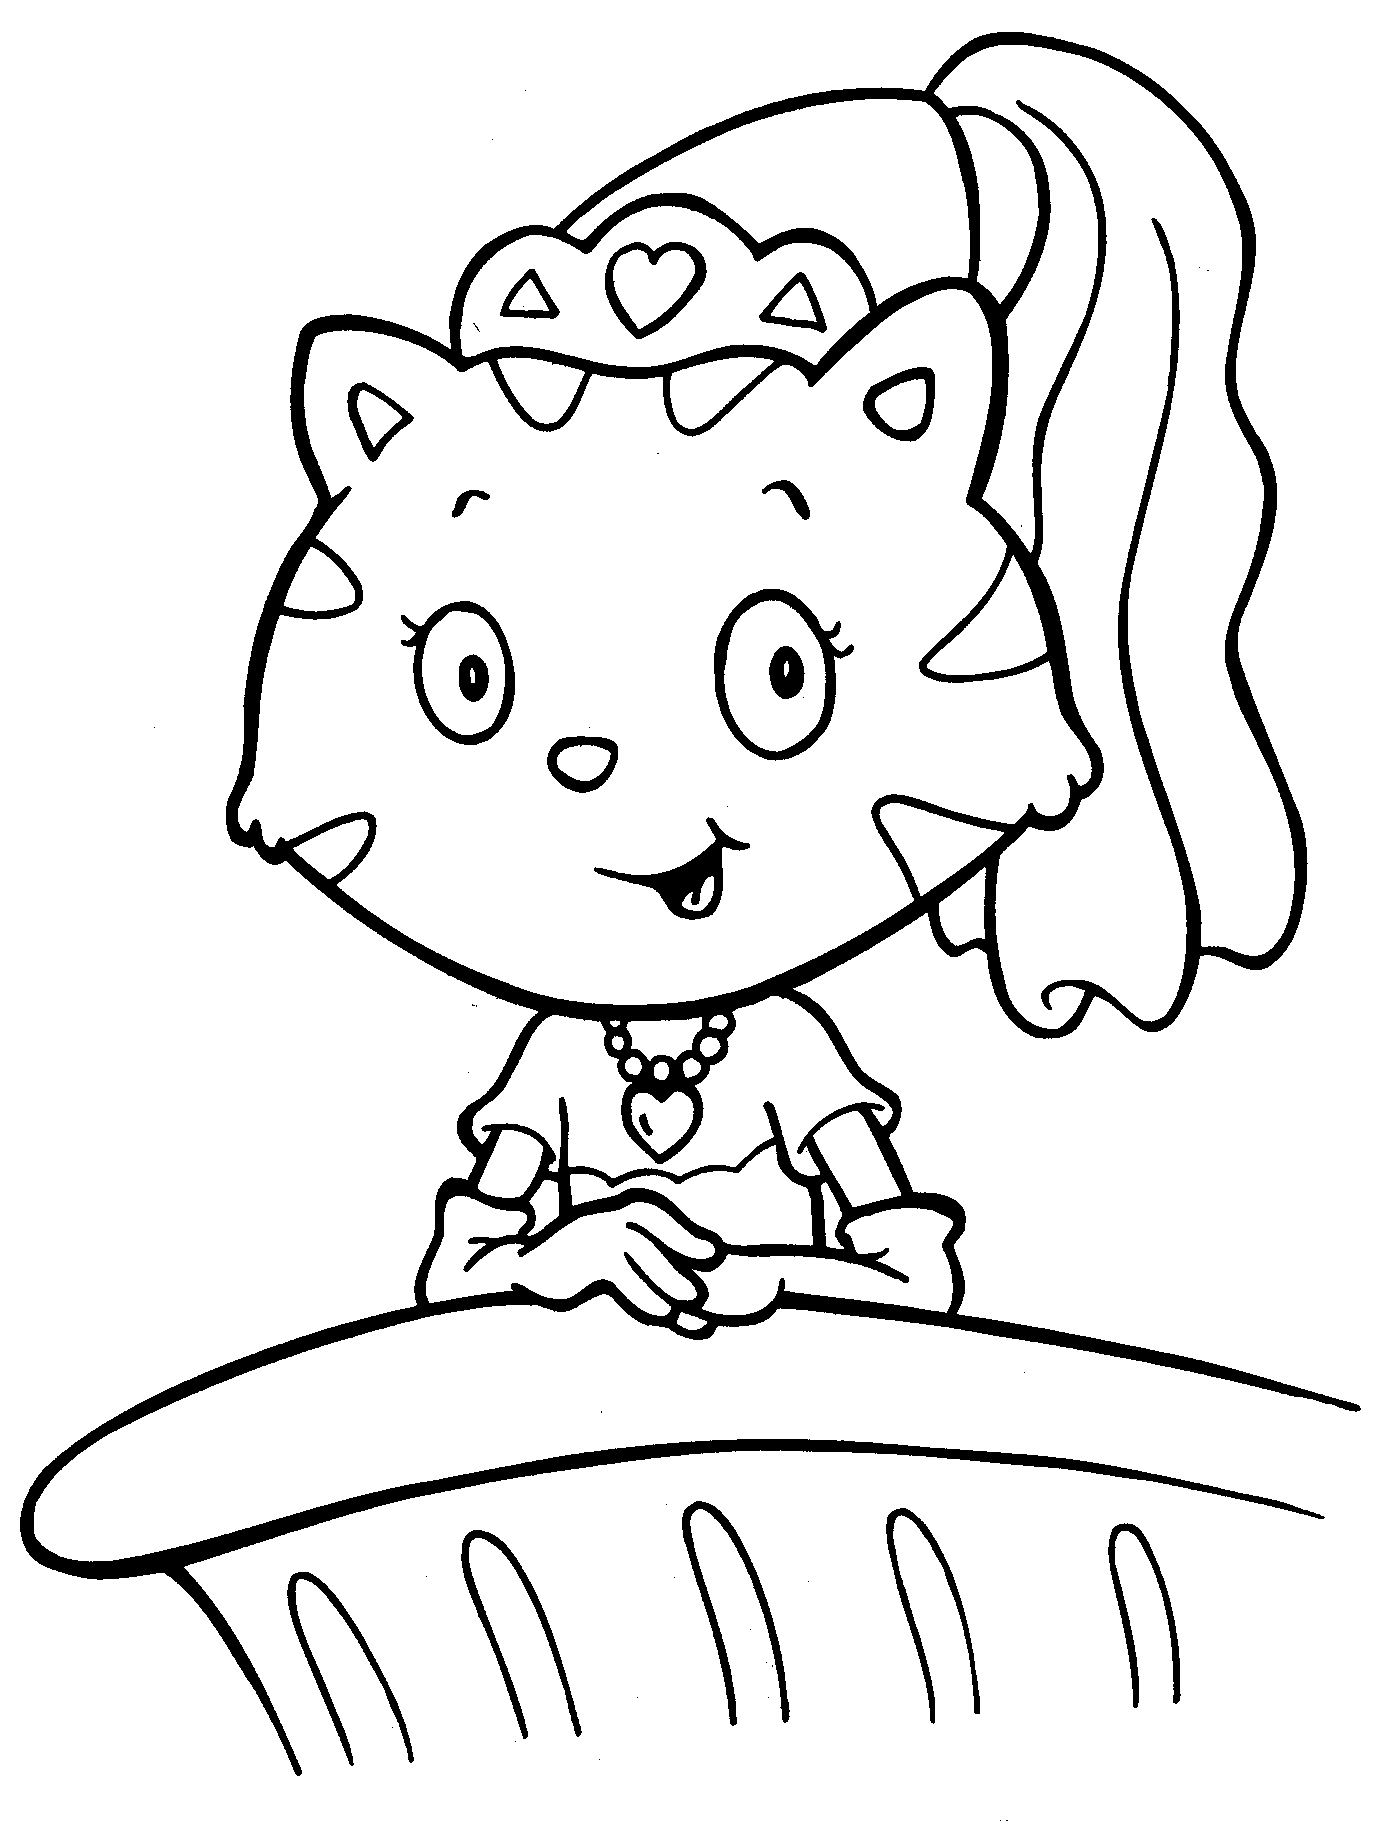 kitten coloring kitten coloring pages best coloring pages for kids coloring kitten 